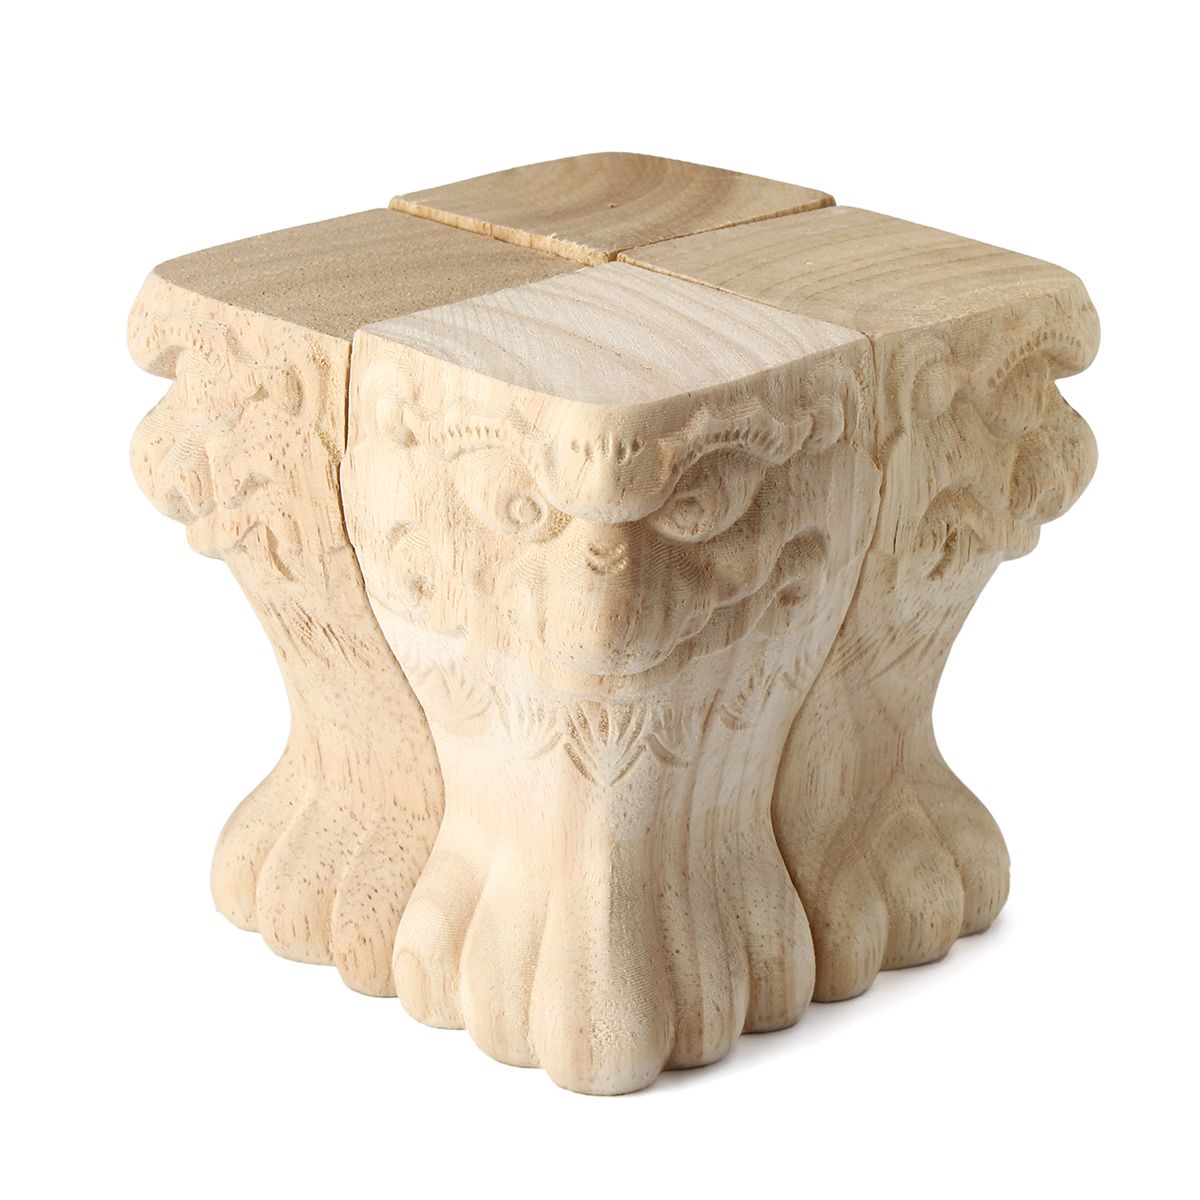 4Pcs-1015cm-European-Solid-Wood-Carving-Furniture-Foot-Legs-Unpainted-Cabinet-Feets-Wood-Decal-1322664